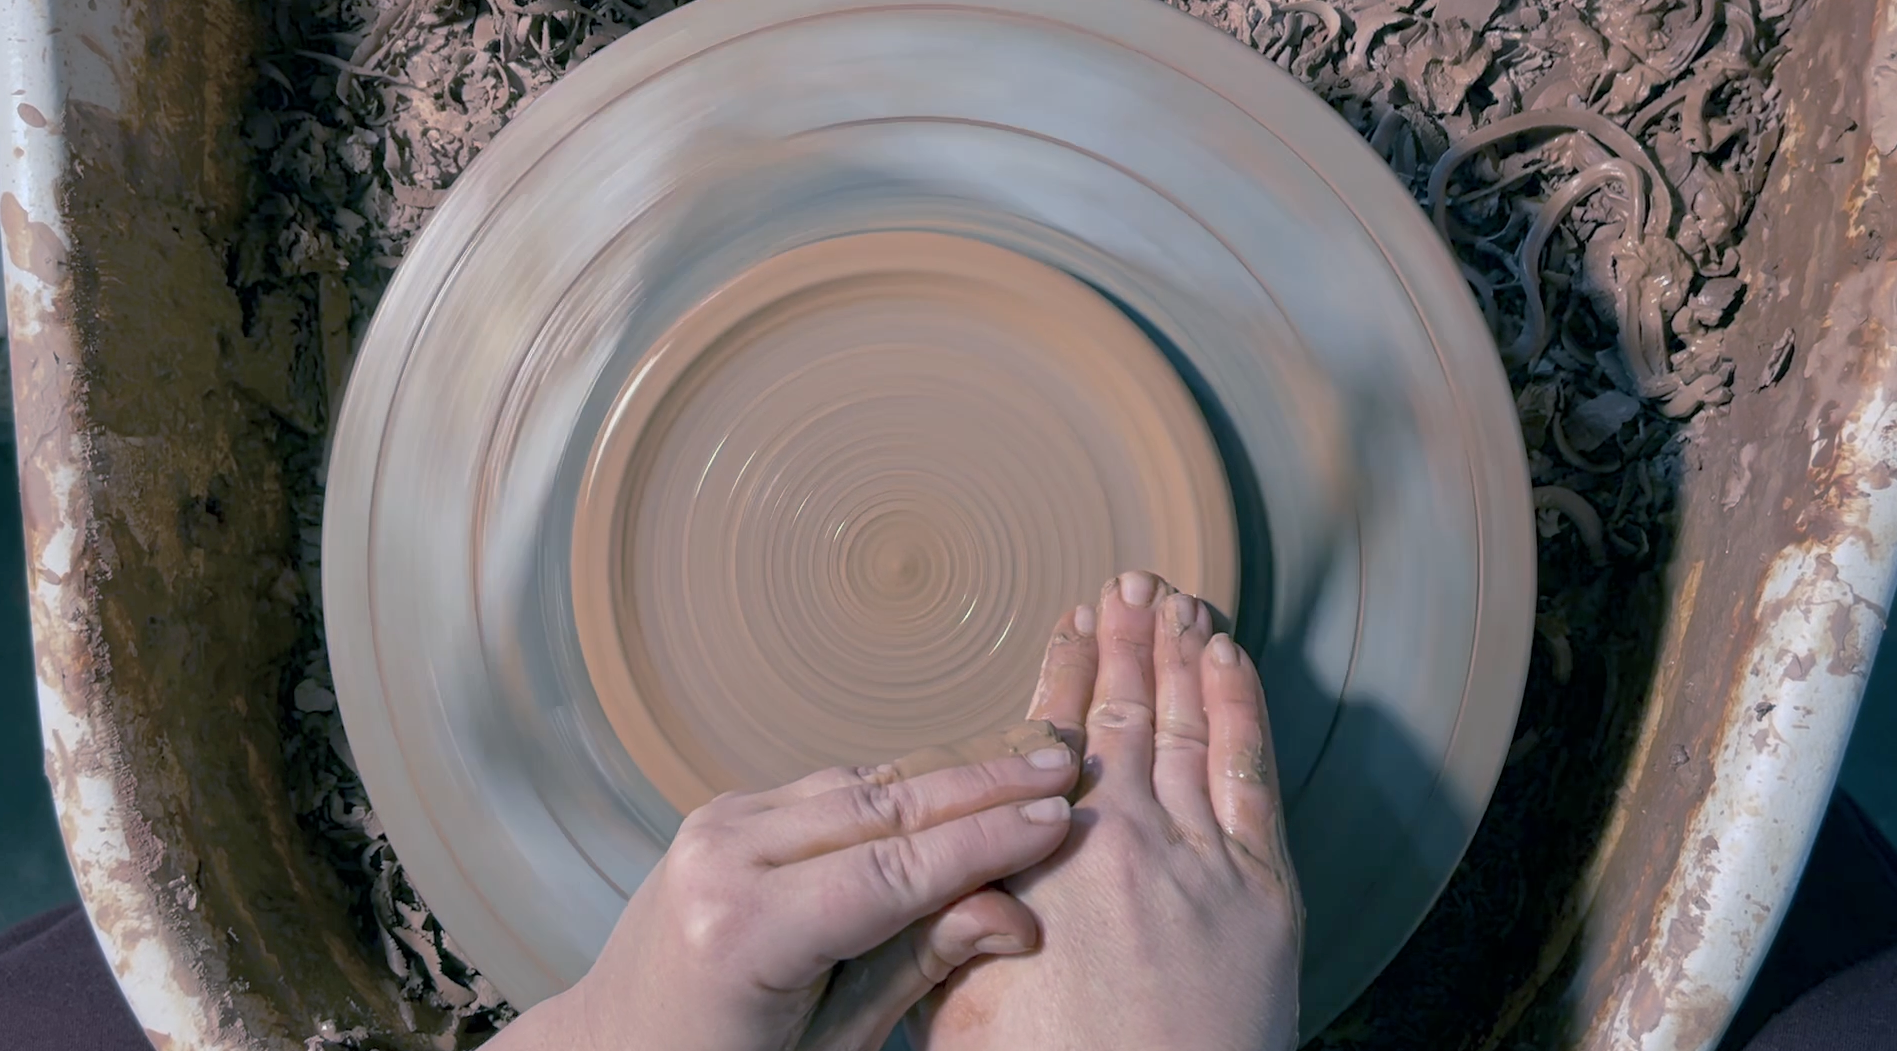 Load video: Video of a hand made ceramic vessel being made on a pottery throwing wheel. We see a lay-down angle of female hands shaping dark red, moist clay while it spins hypnotically on the wheel head making perfect spirals.